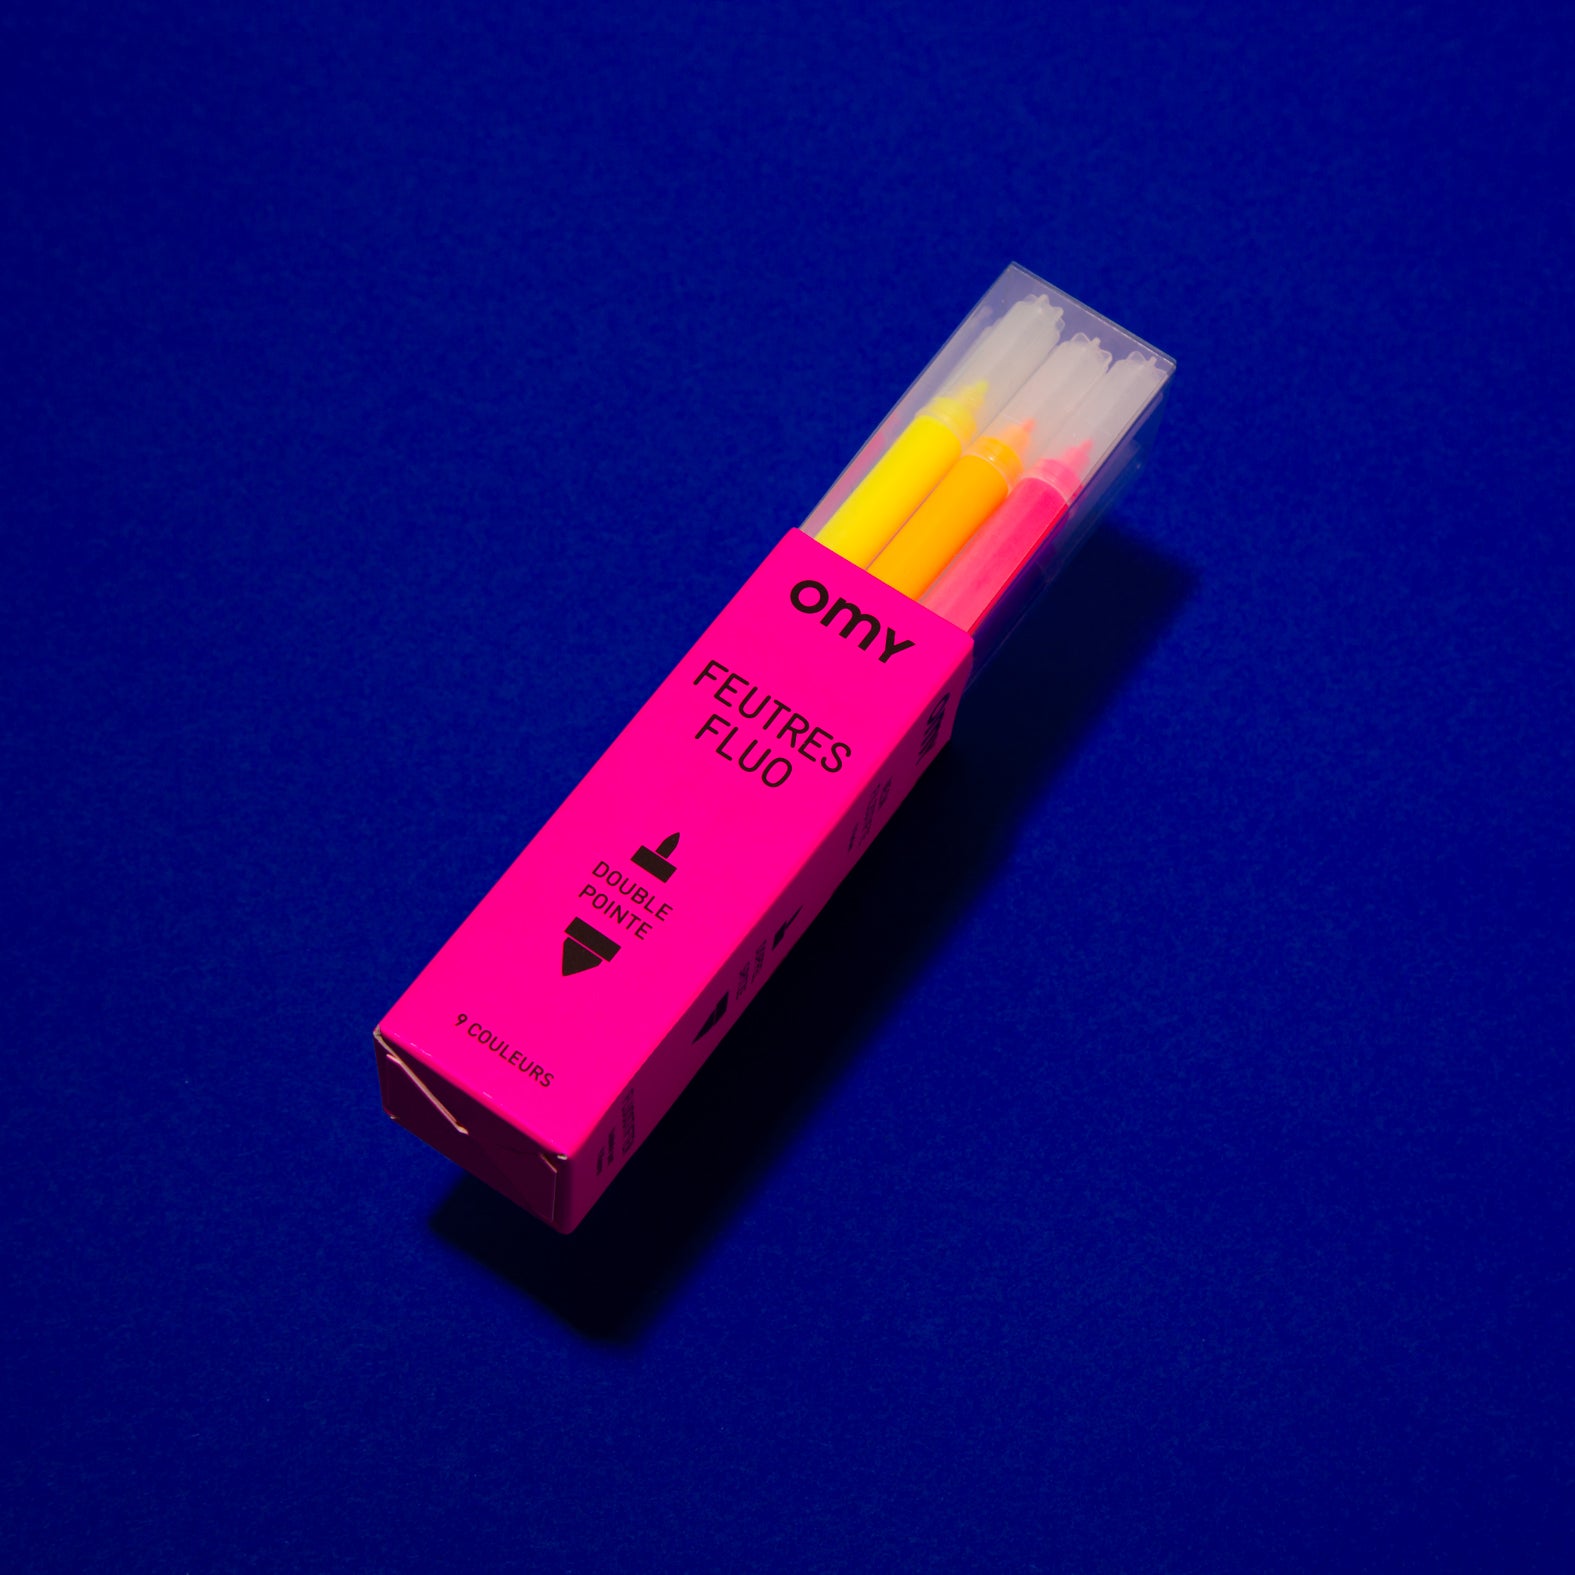 Neon markers